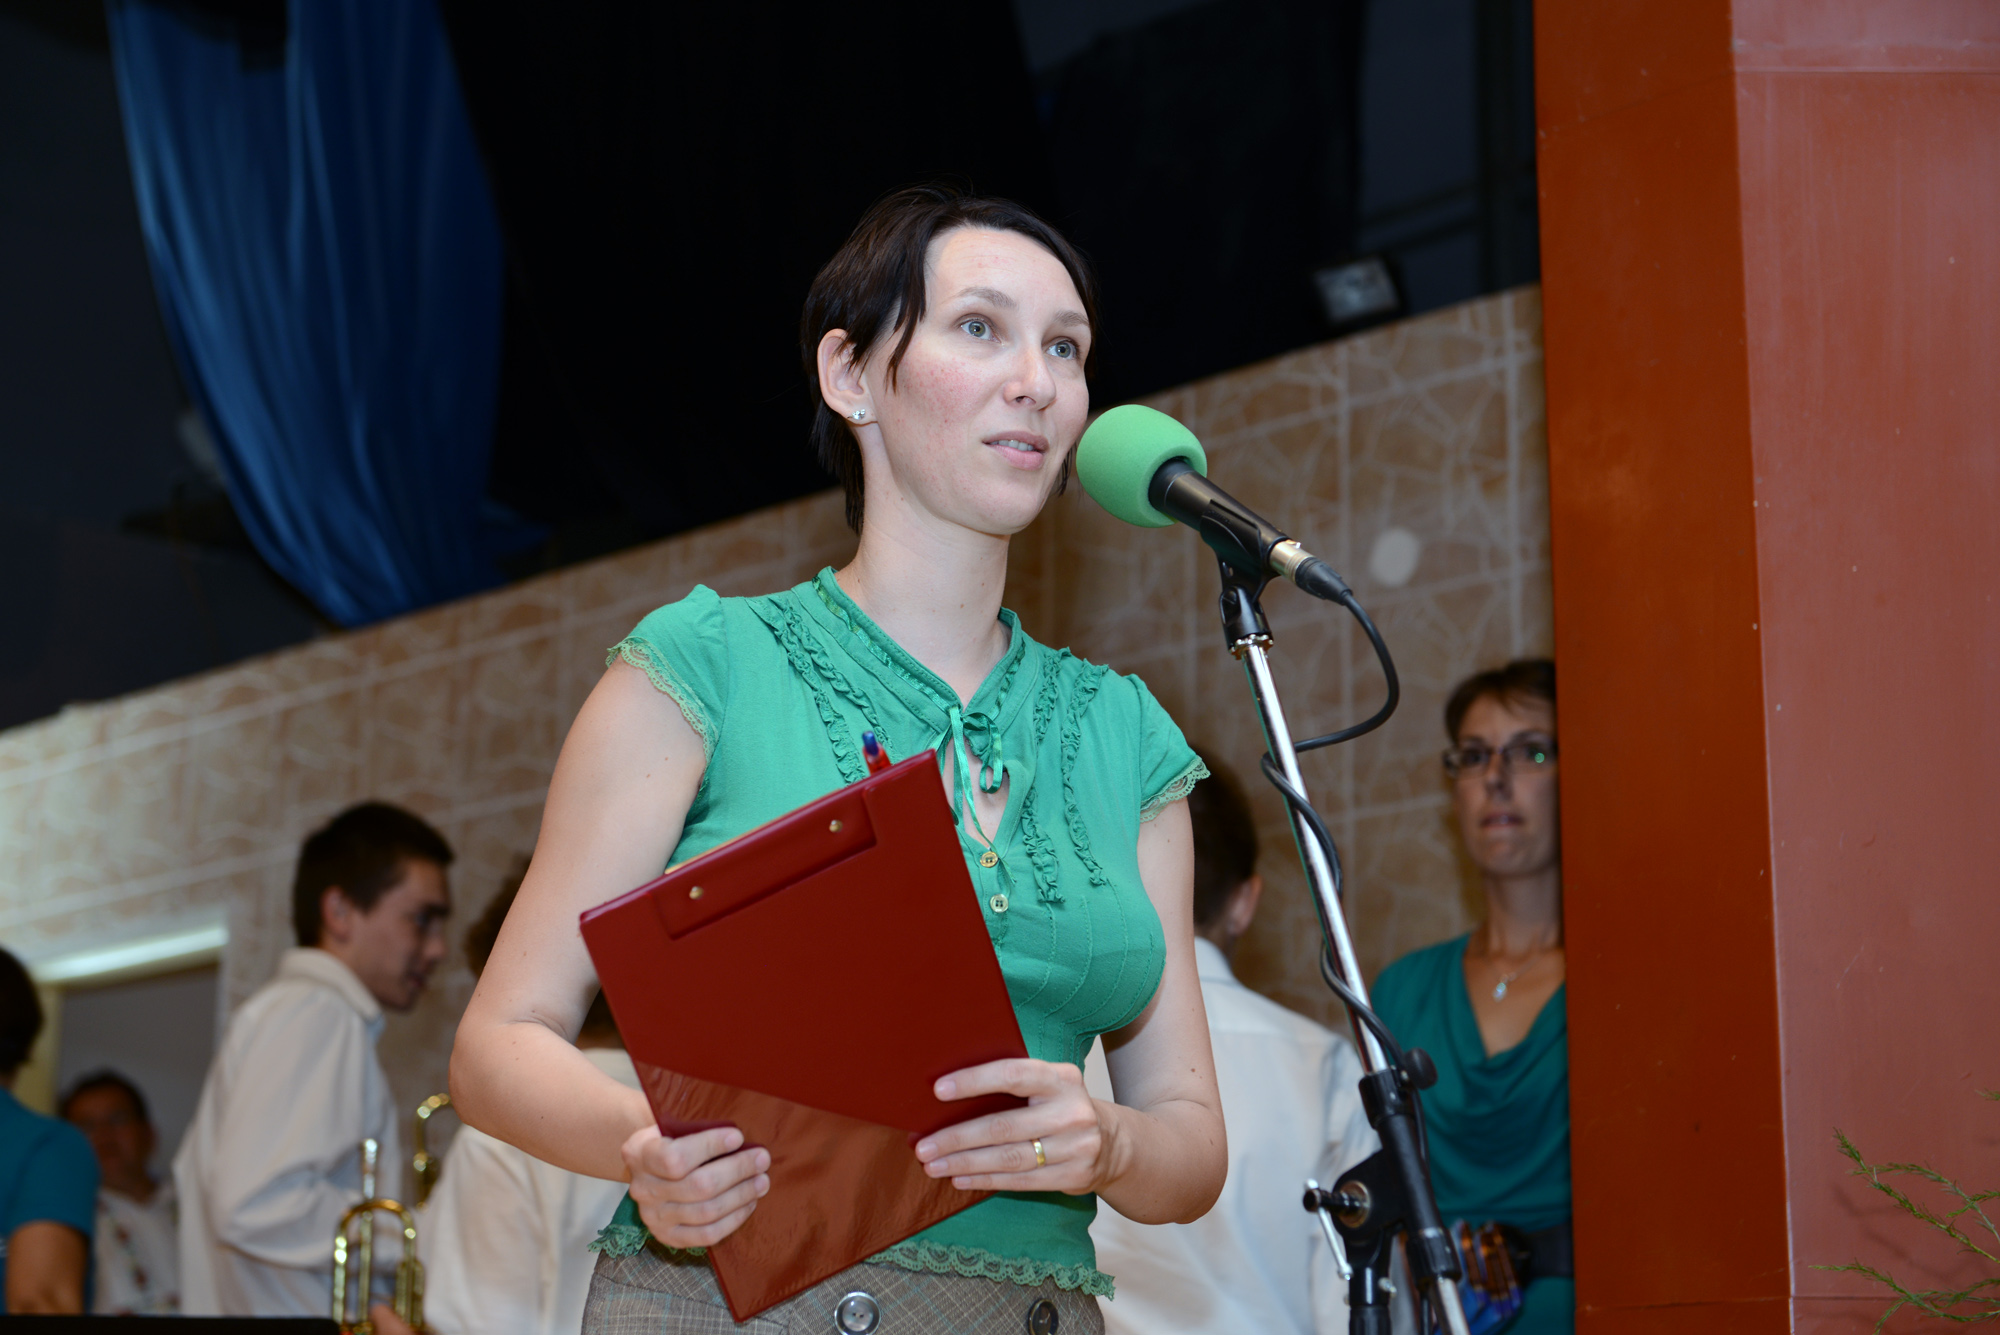 the young woman is speaking into a microphone while holding folders